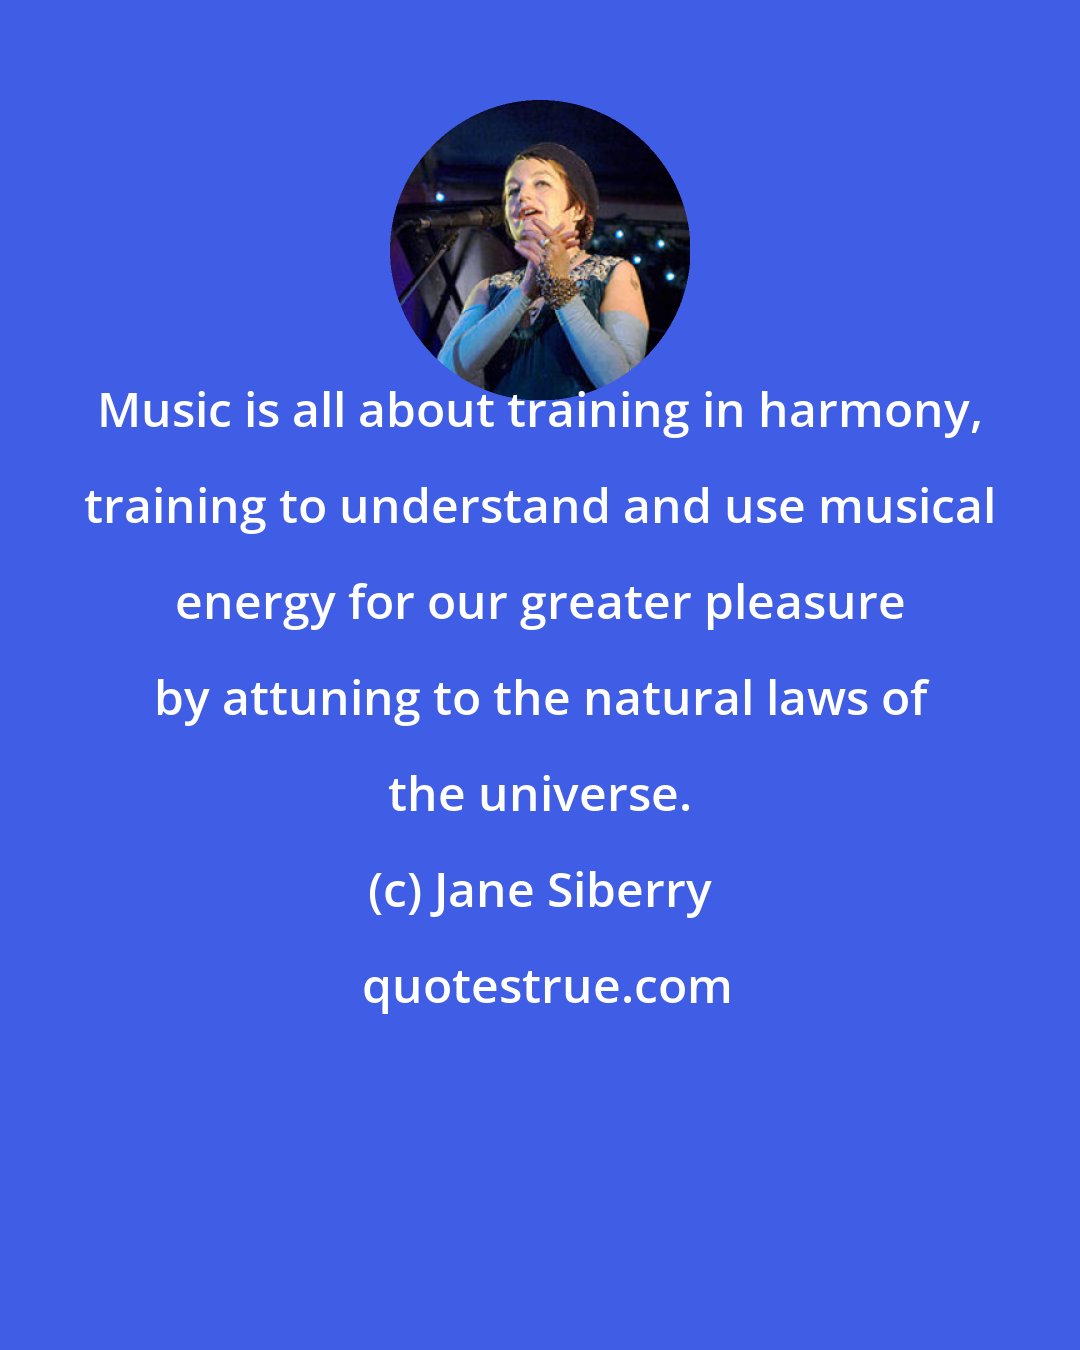 Jane Siberry: Music is all about training in harmony, training to understand and use musical energy for our greater pleasure by attuning to the natural laws of the universe.